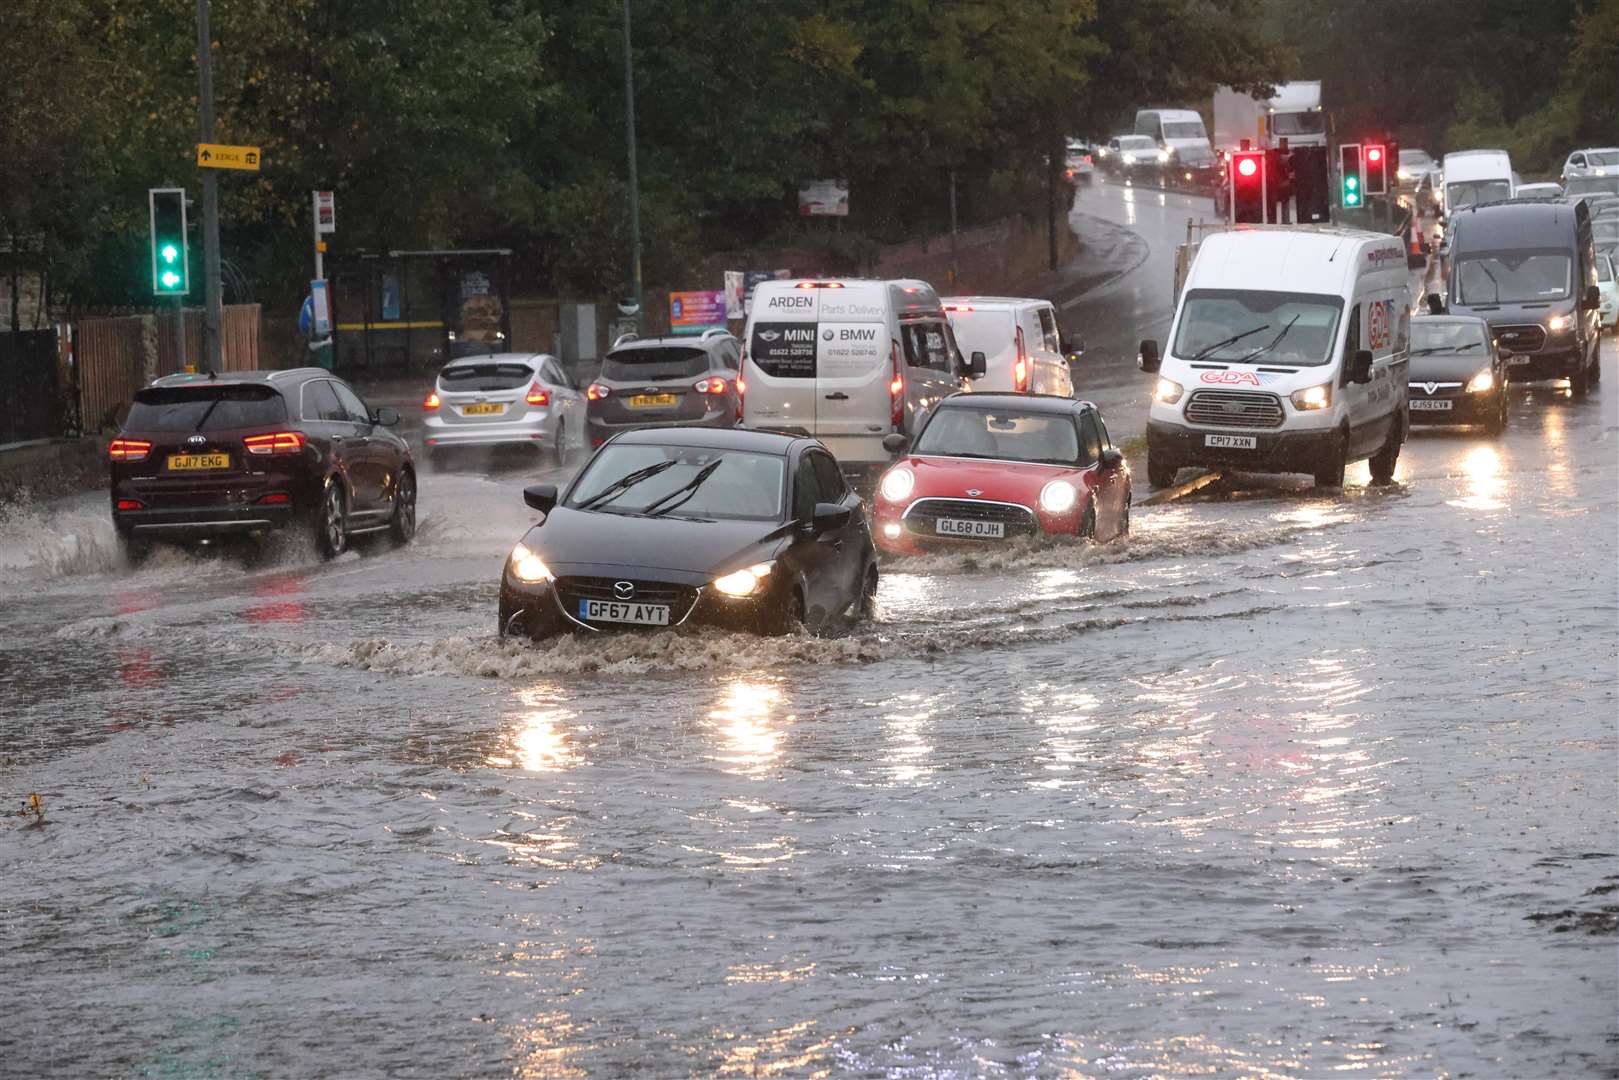 Flooding in London Road, Aylesford. Picture: UKNIP from November 3.